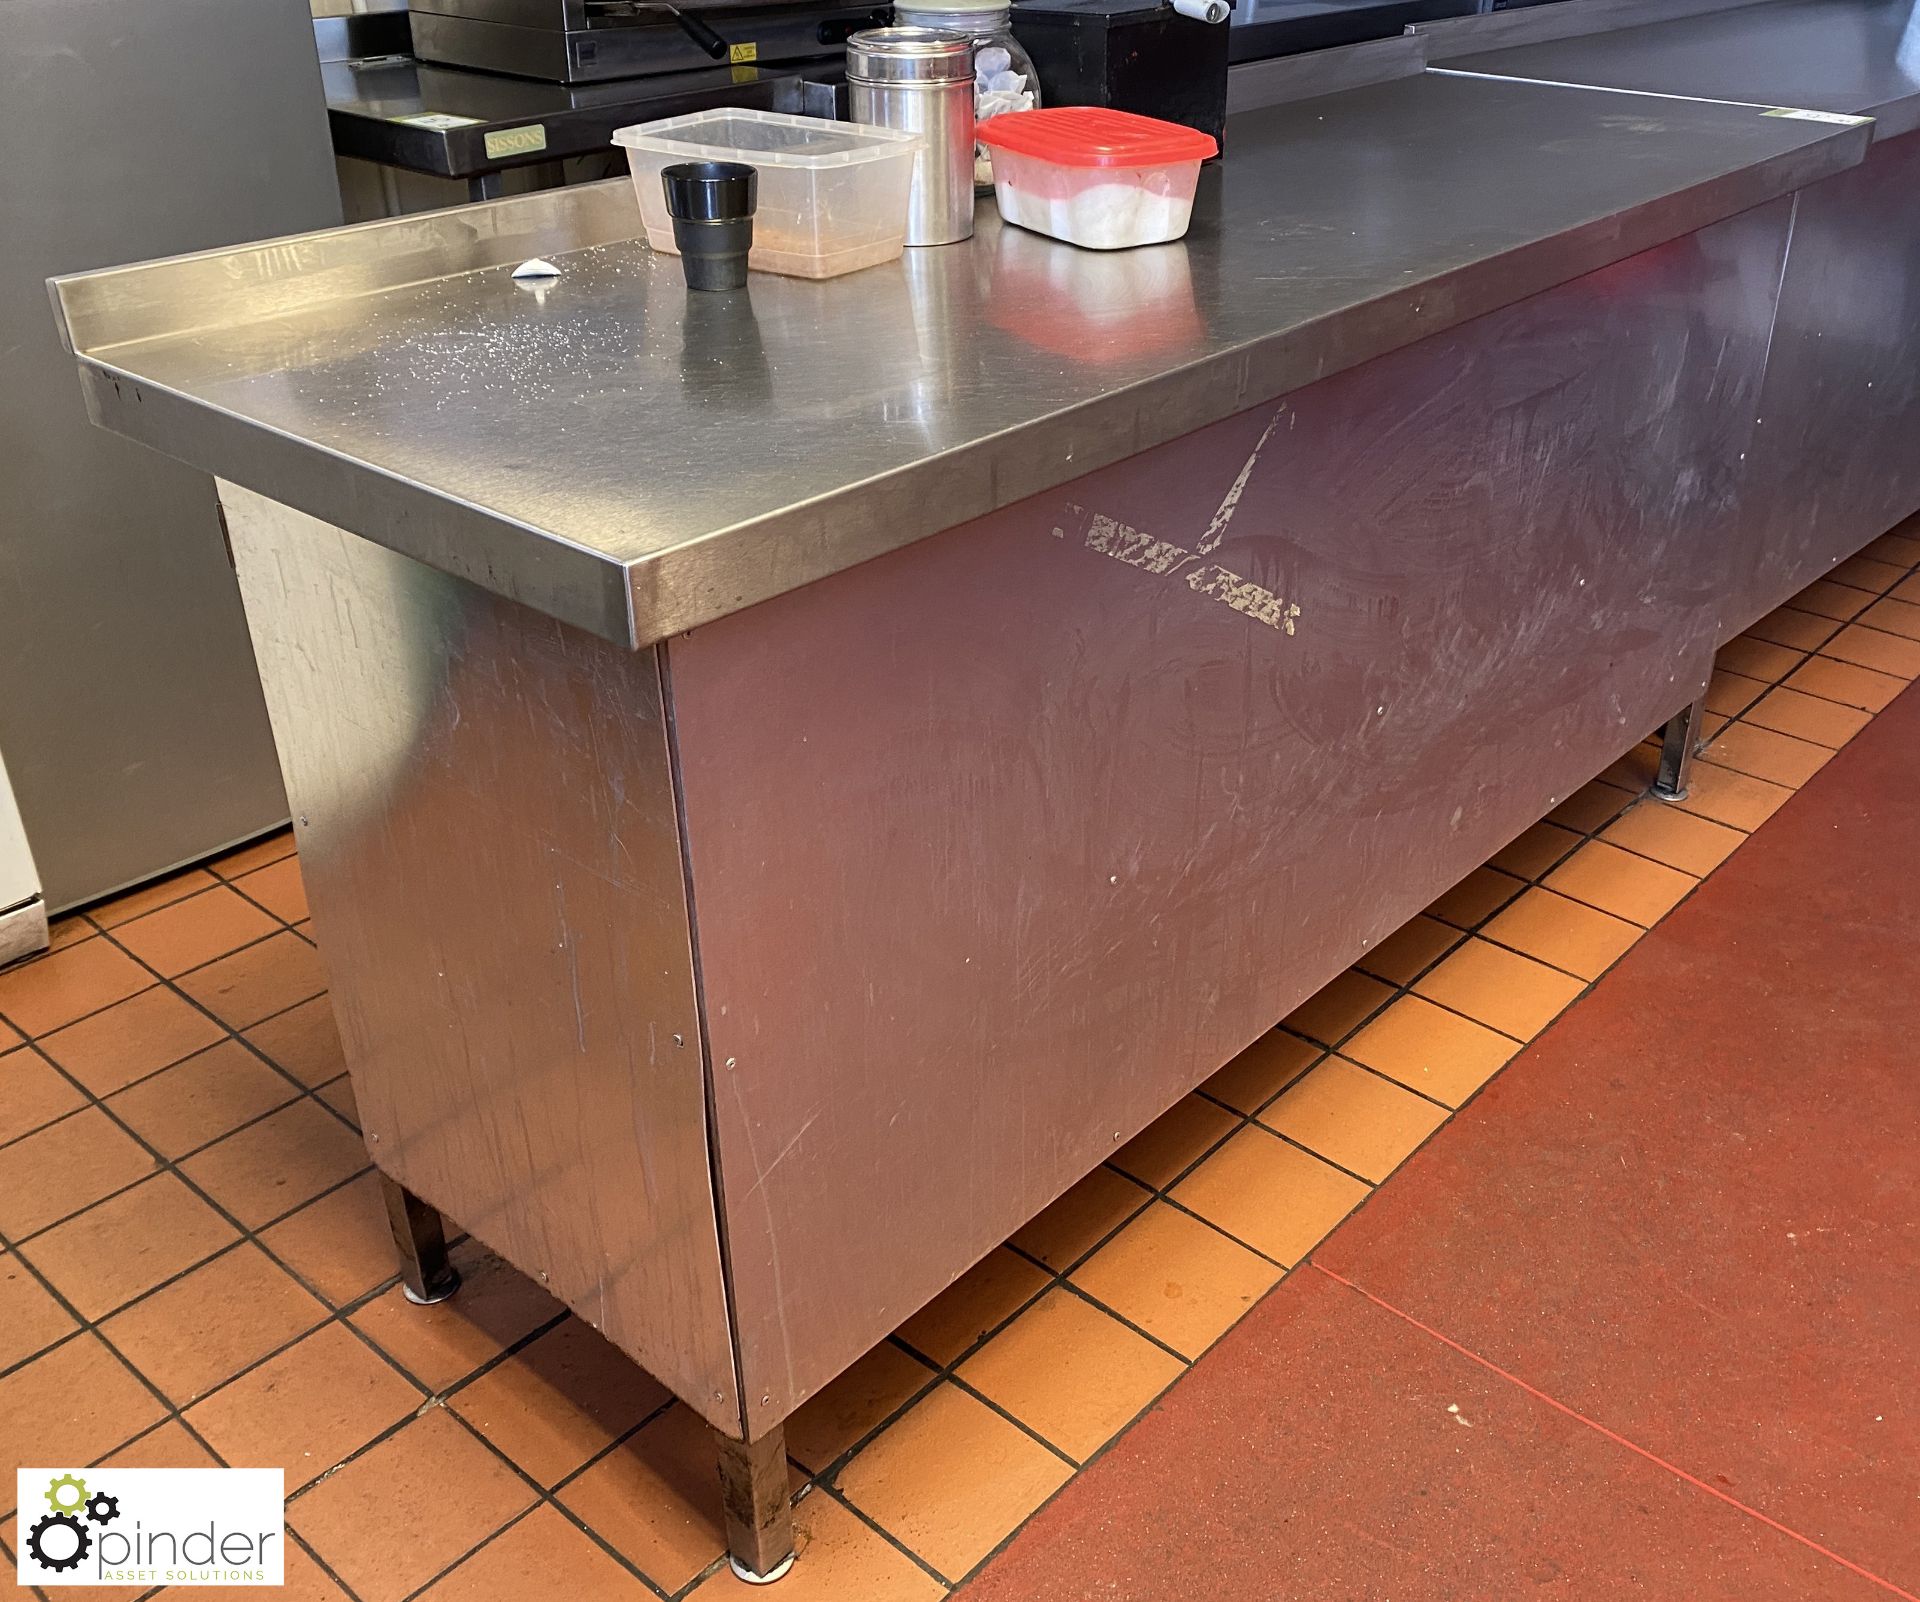 Stainless steel Preparation Table/Serving Counter, 1800mm x 600mm x 870mm, with double door - Image 2 of 5